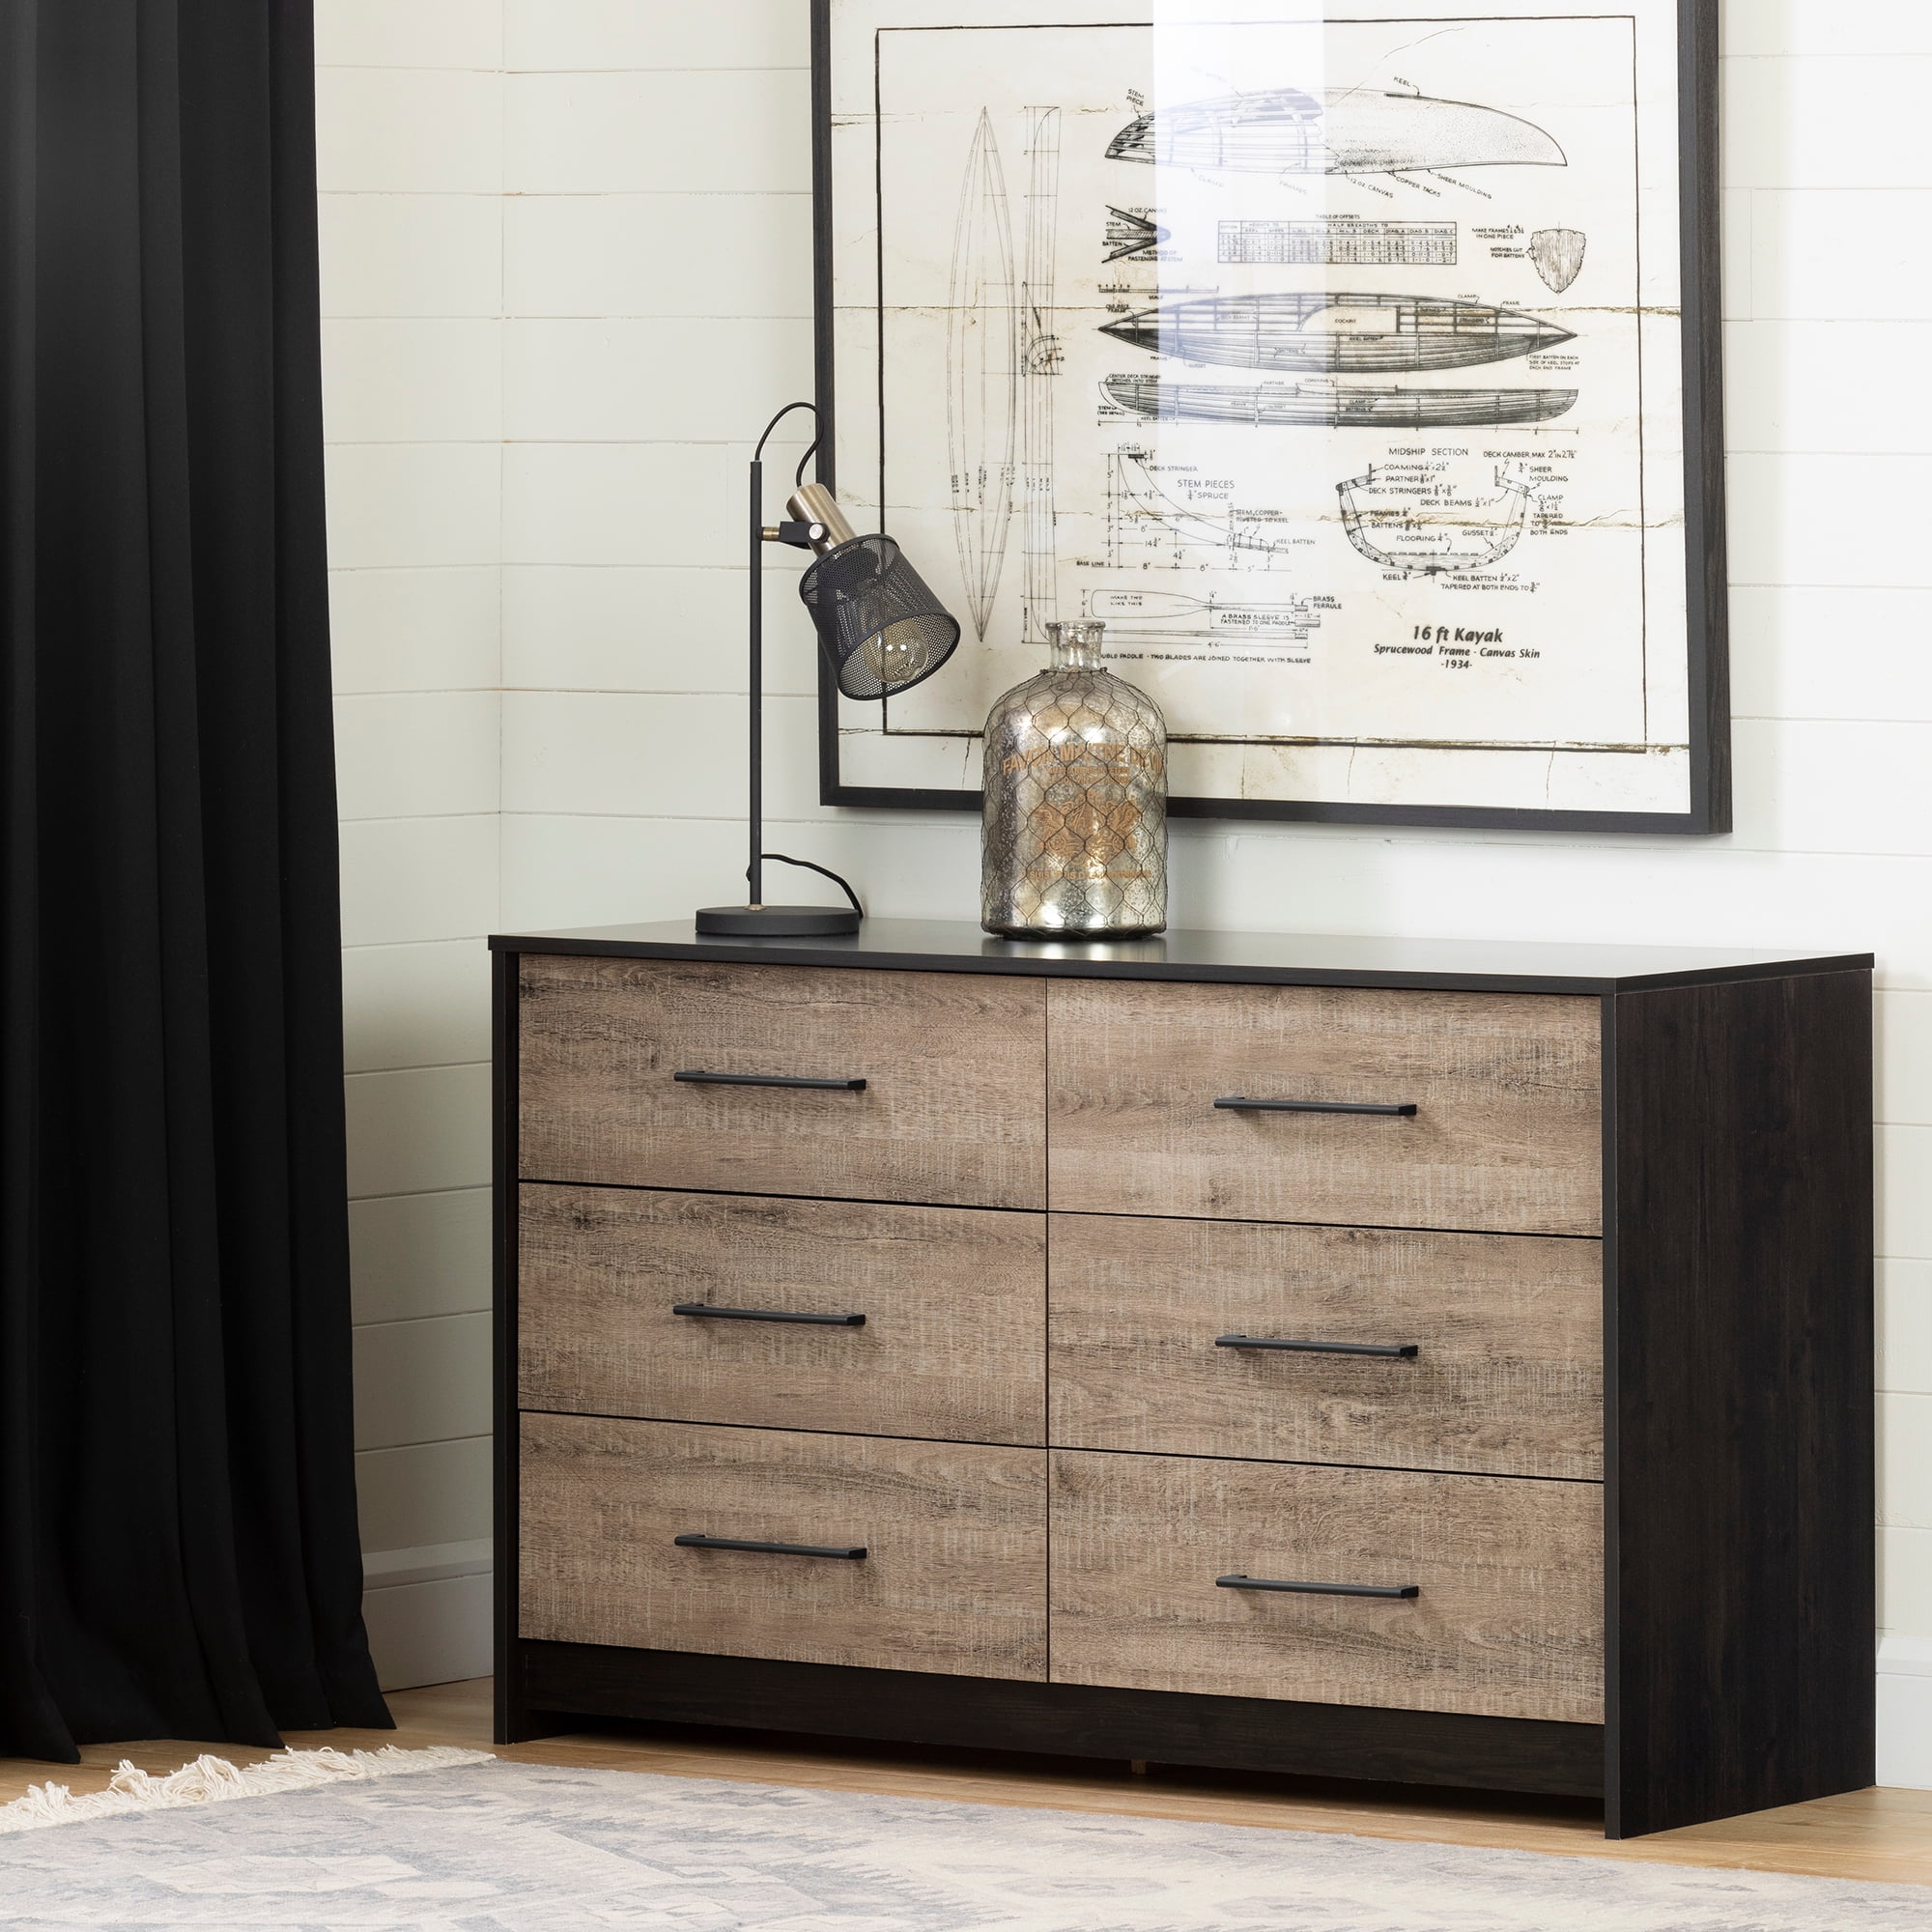 South S Holland 6 Drawer Double, Holland 6 Drawer Double Dresser